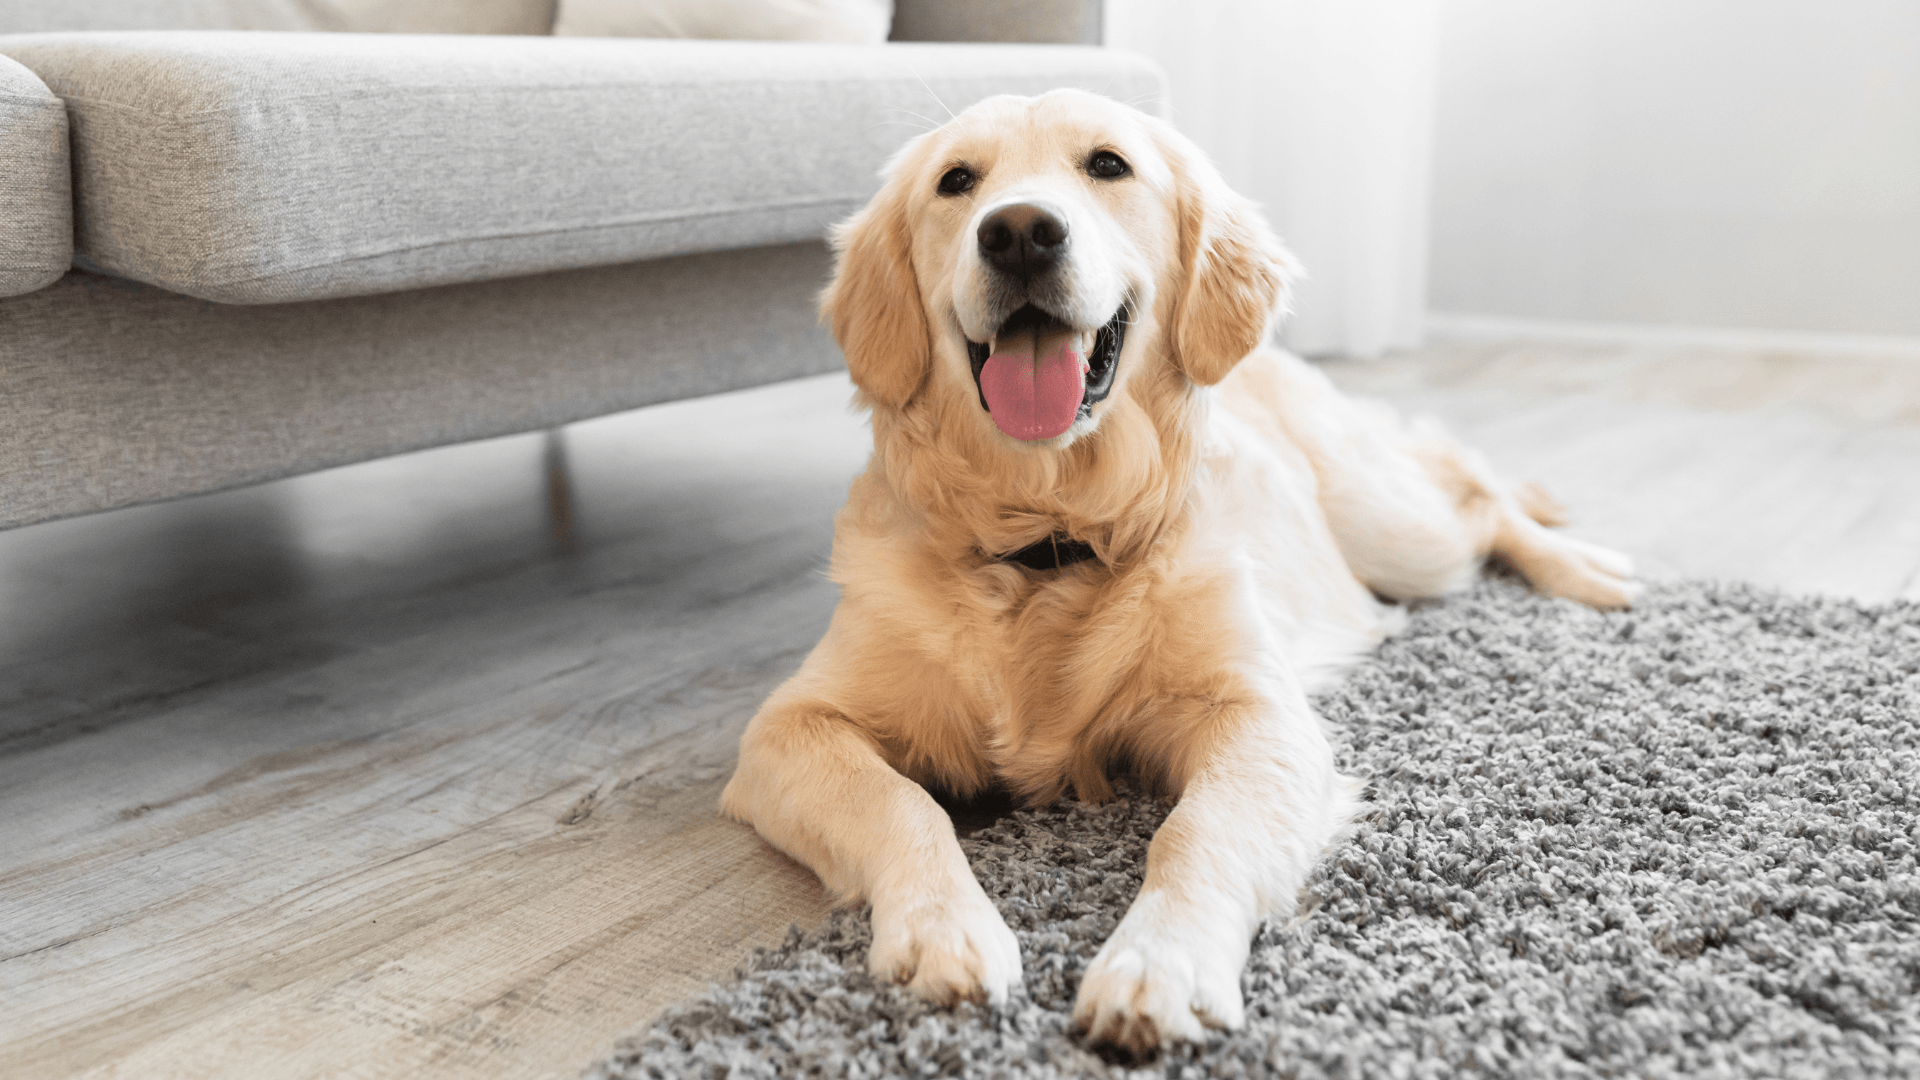 golden retriever laying on floor with gray carpet and wooden floor